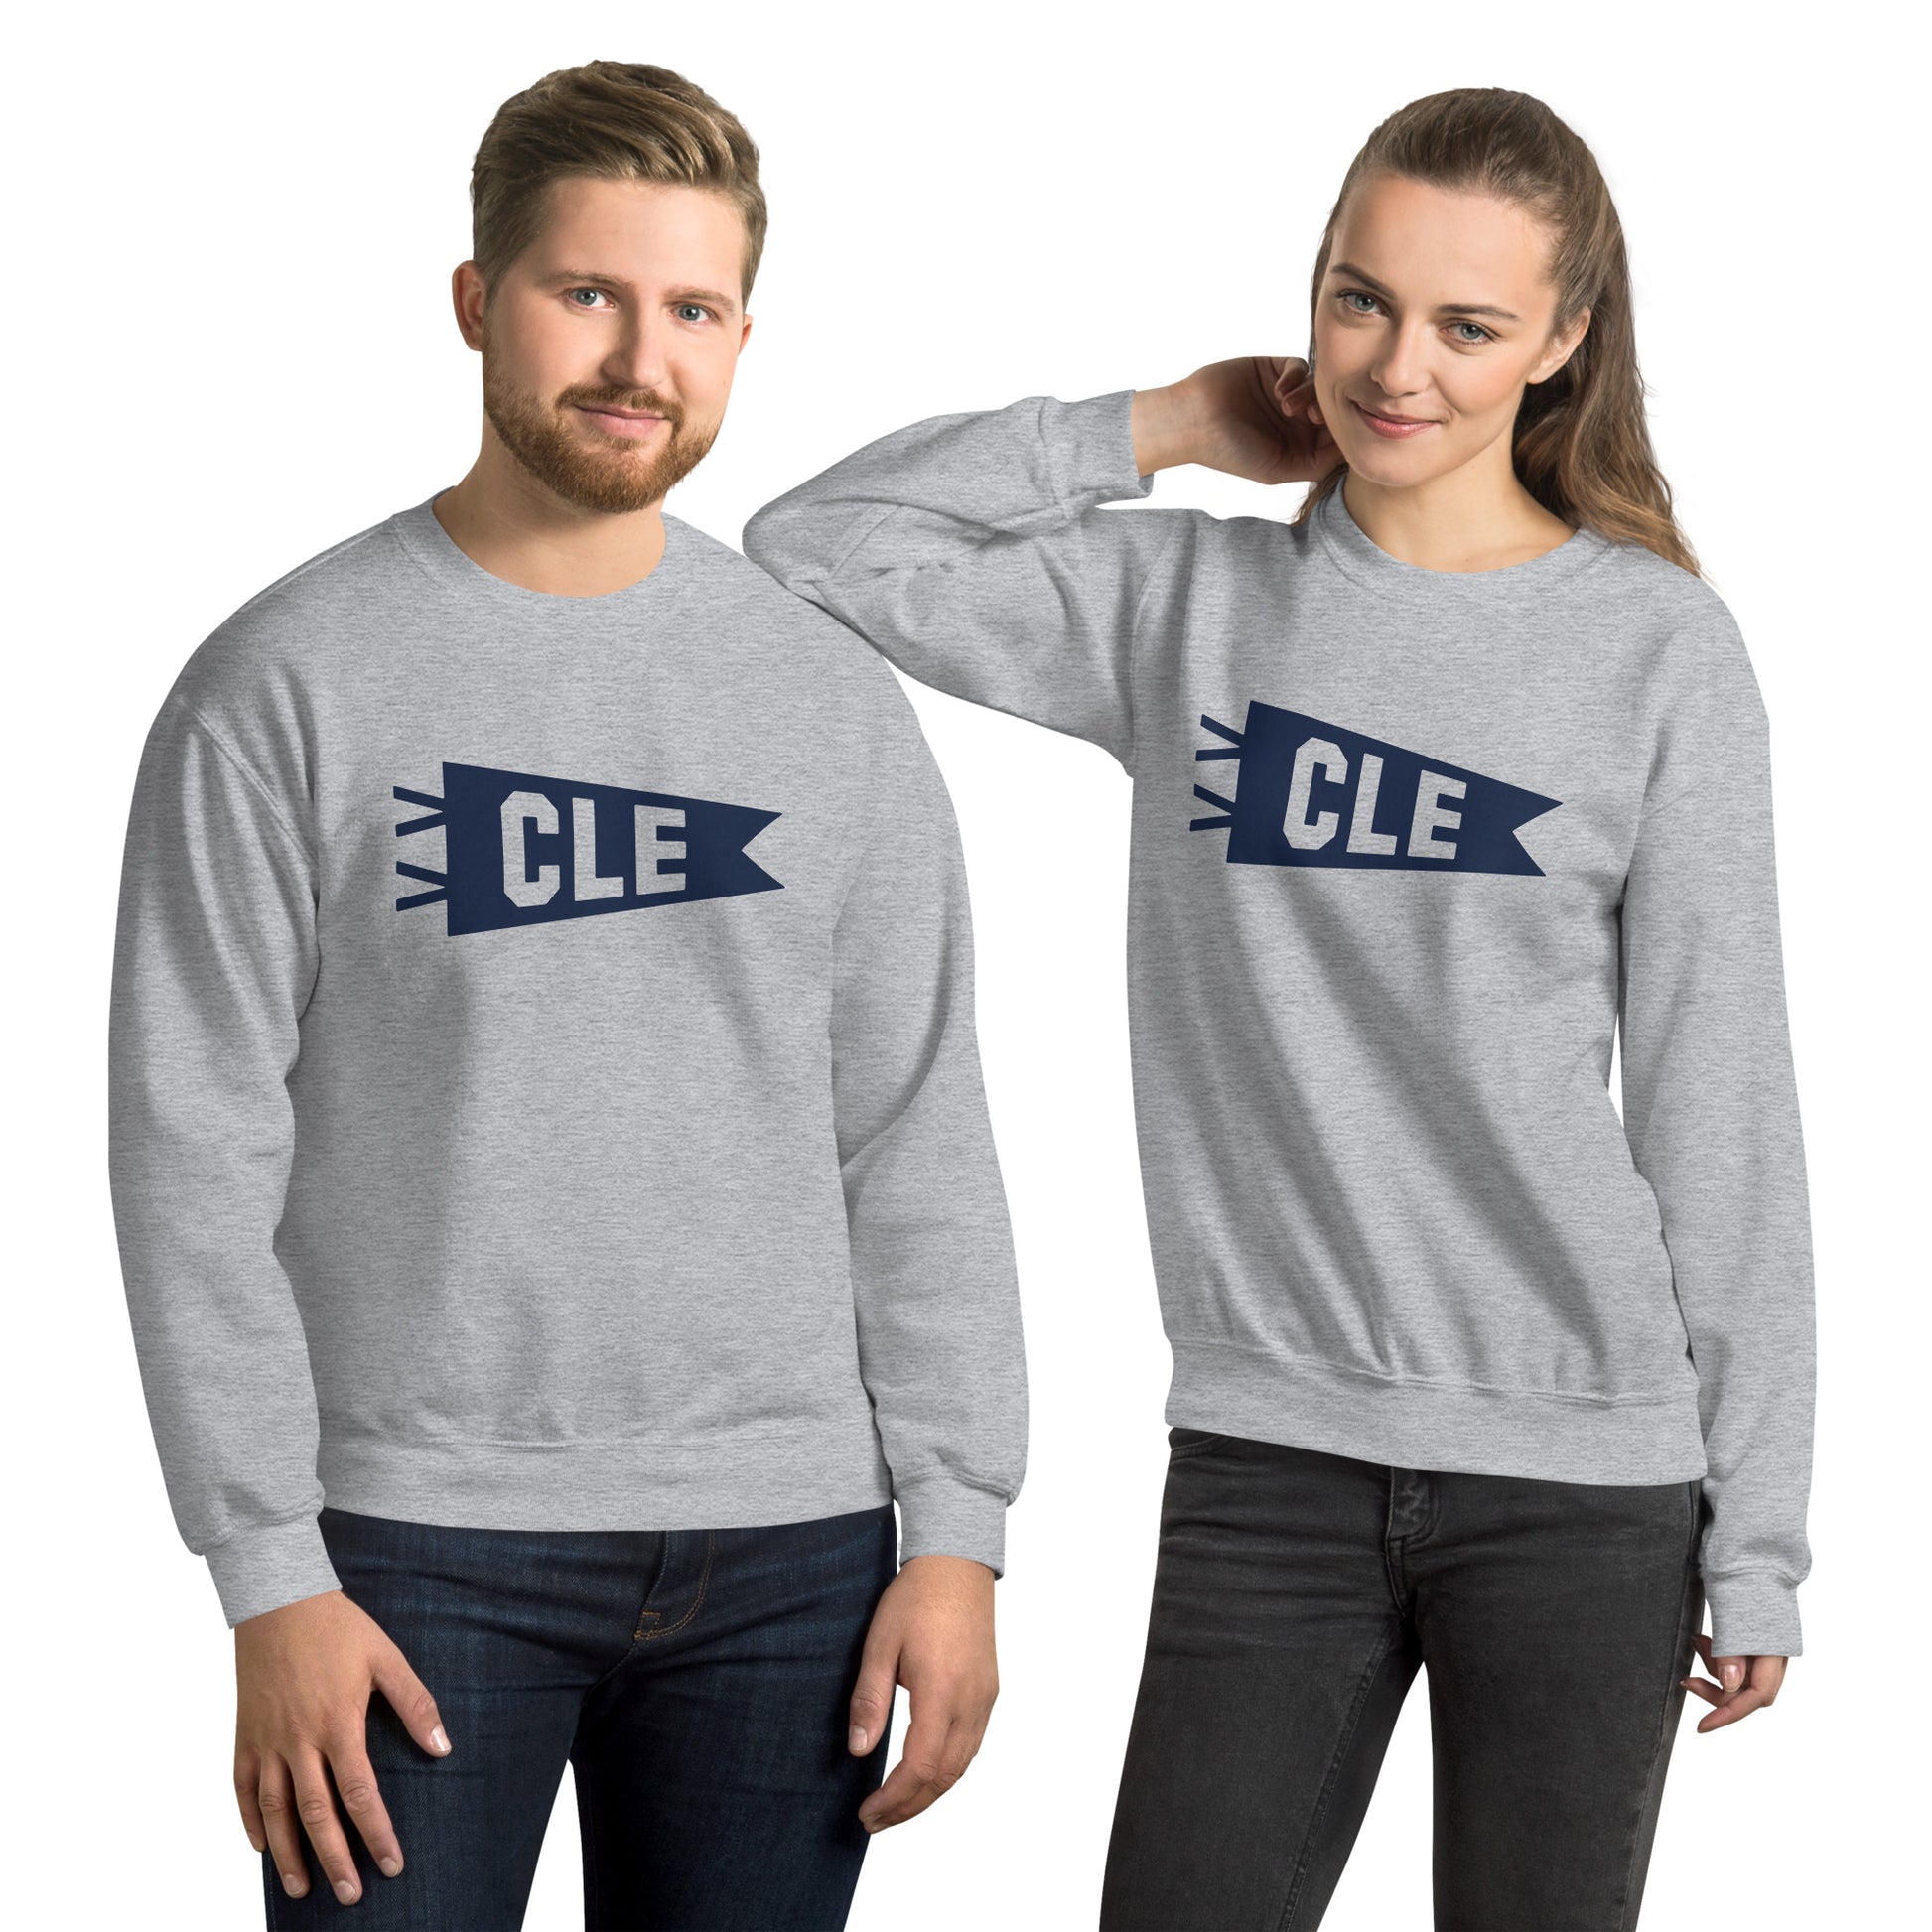 Airport Code Sweatshirt - Navy Blue Graphic • CLE Cleveland • YHM Designs - Image 09